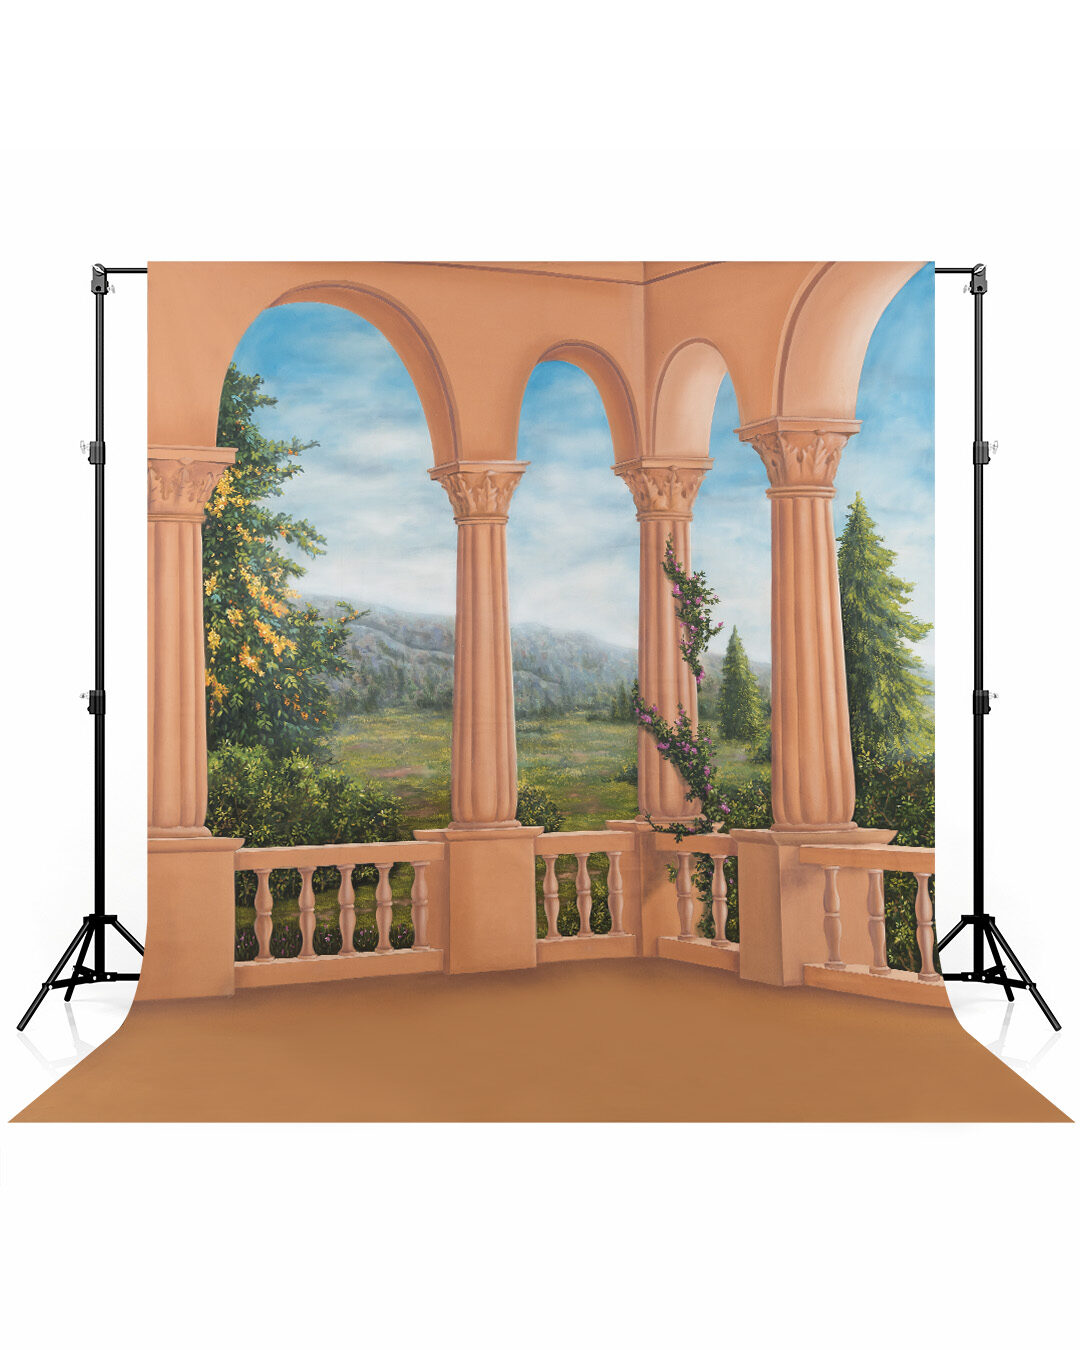 Backdrops4ever Blooming Palace 3D Scenic Photo Video Backdrop